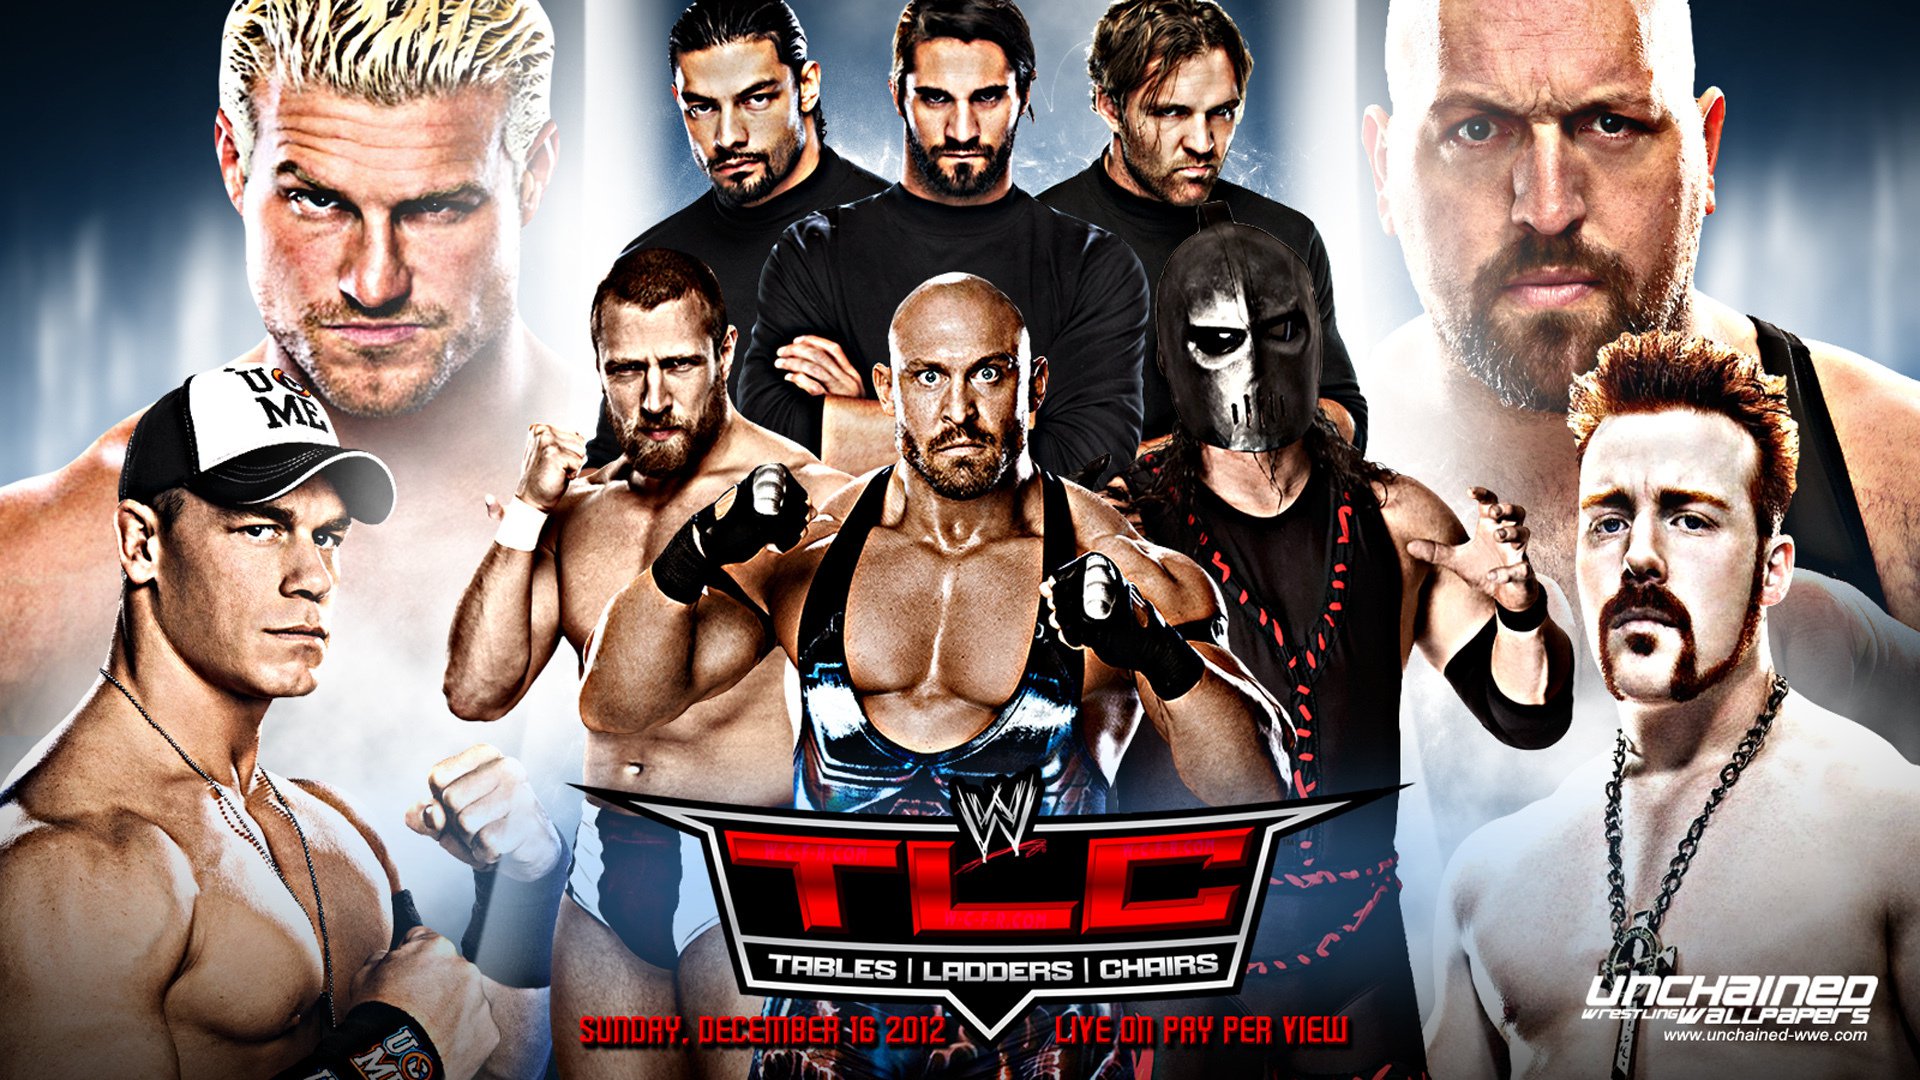 Nice wallpapers WWE TLC: Tables Ladders & Chairs 2012 1920x1080px